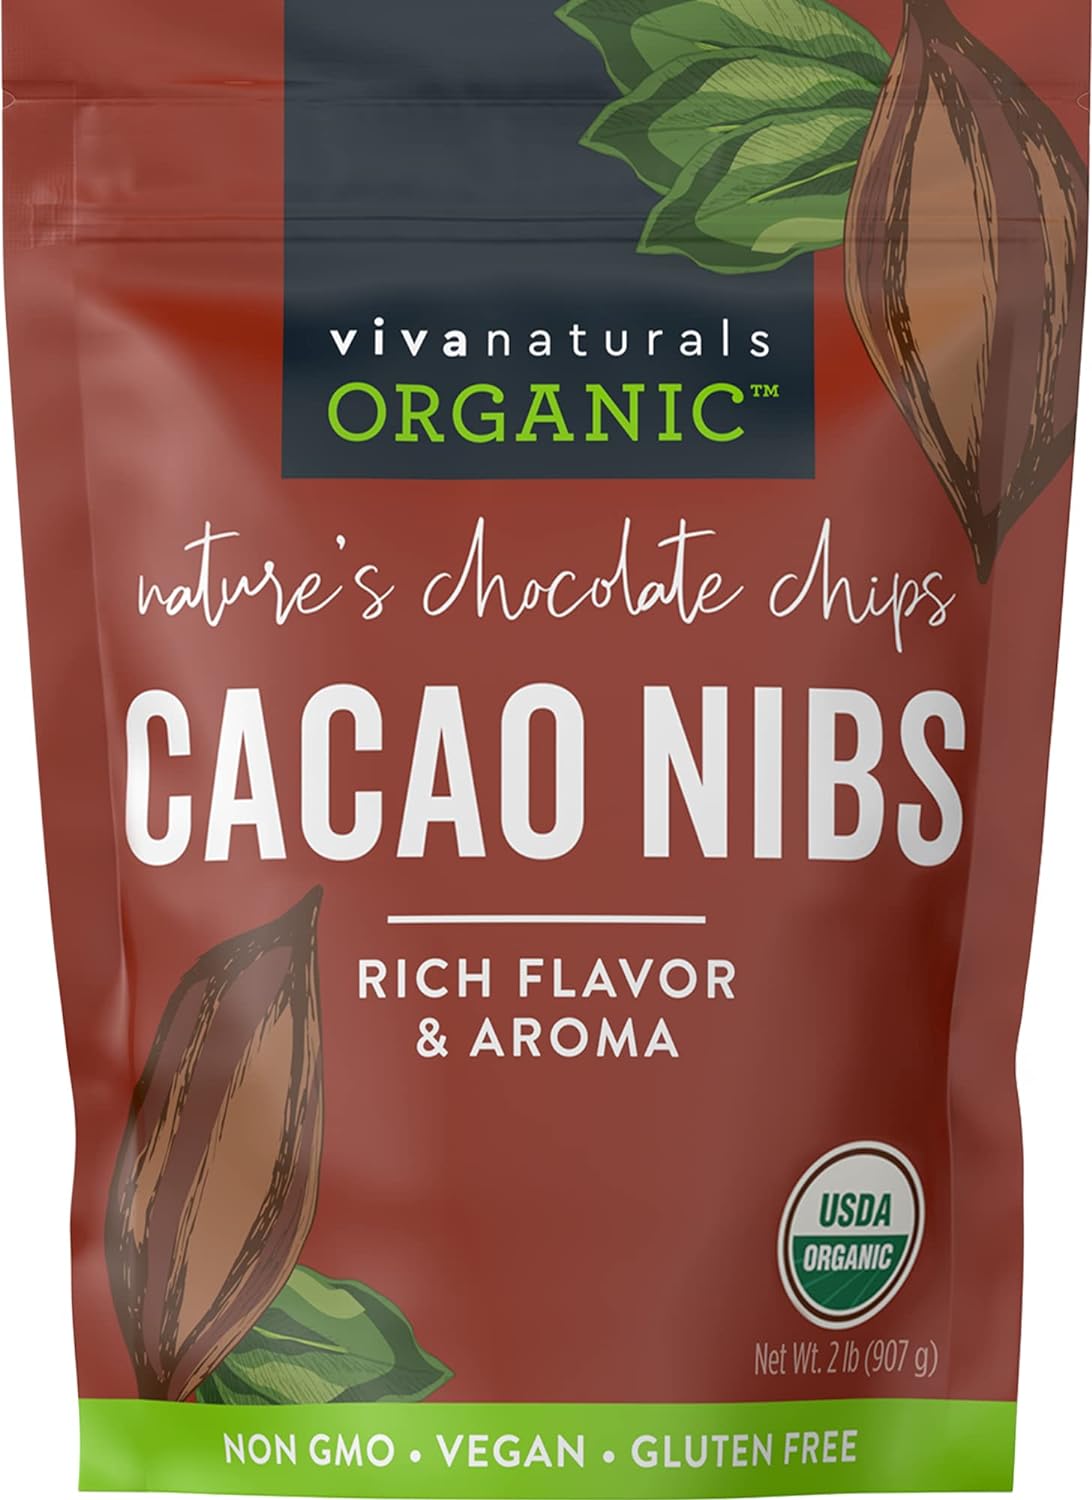 Viva Naturals Organic Cacao Nibs, 2 lb Bag (907g) - Keto Friendly and Vegan Unsweetened Chocolate Chip Substitute, Perfect for Gluten Free Baking, Cacao Nib Smoothies and More, Non-GMO and Gluten Free